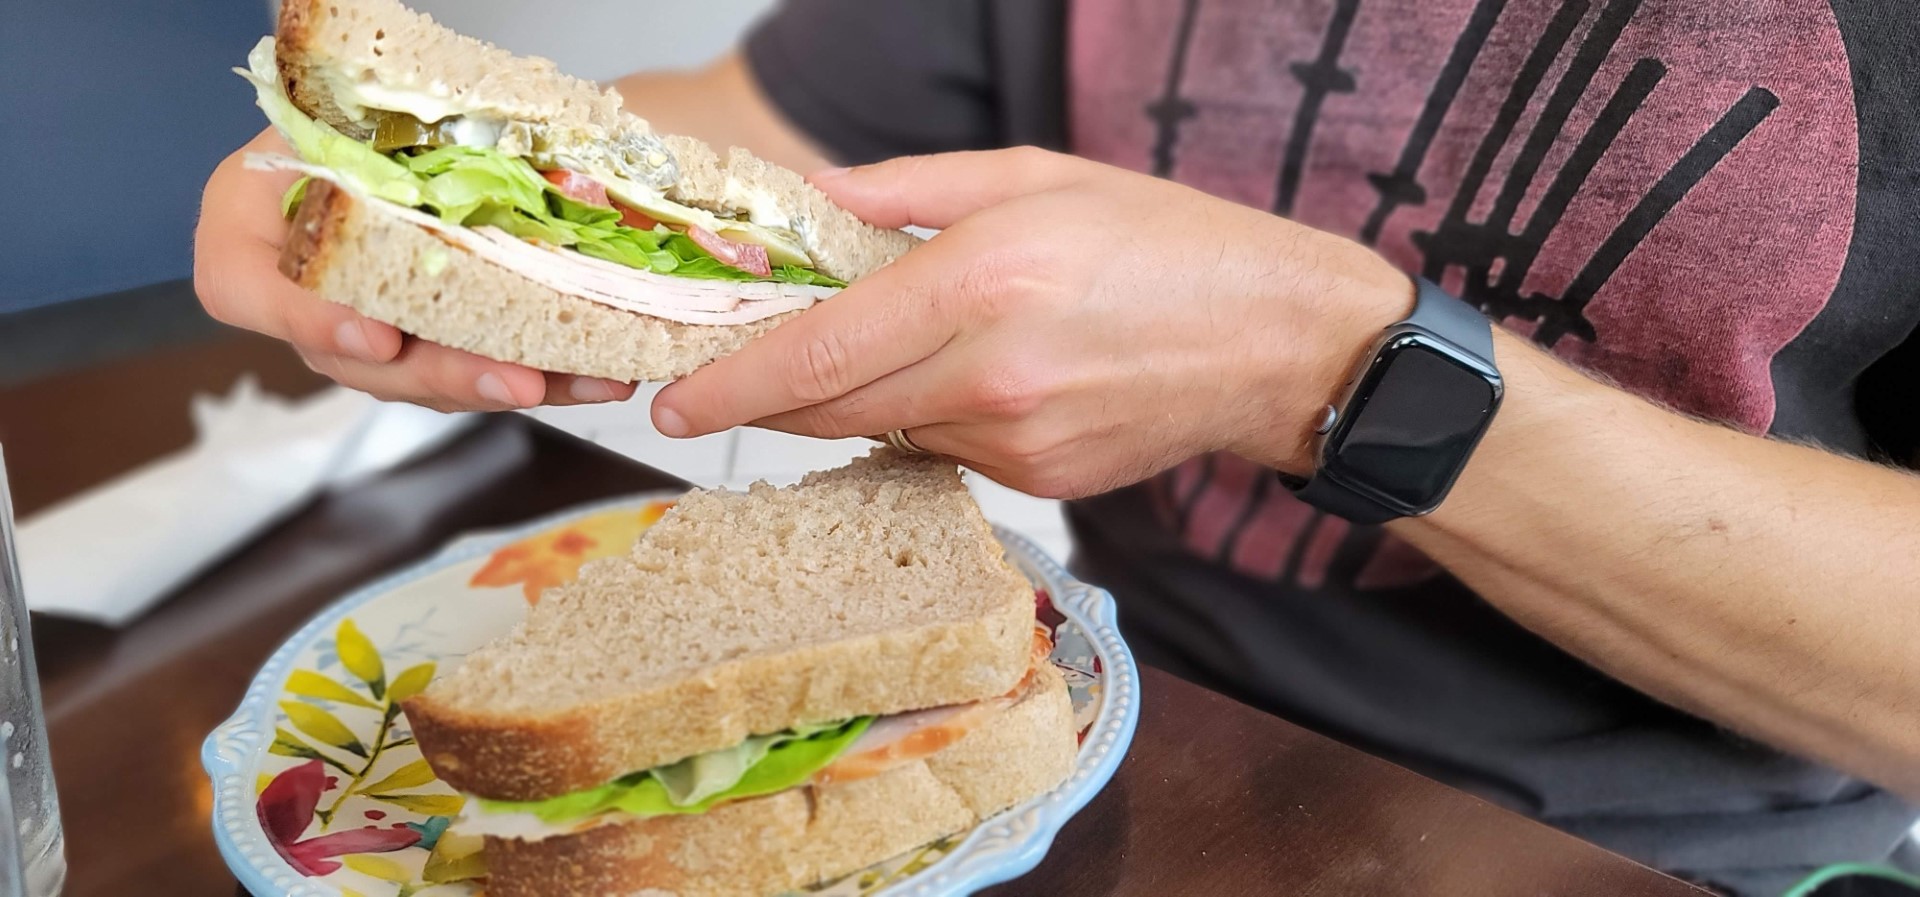 hands holding freshly made sandwich